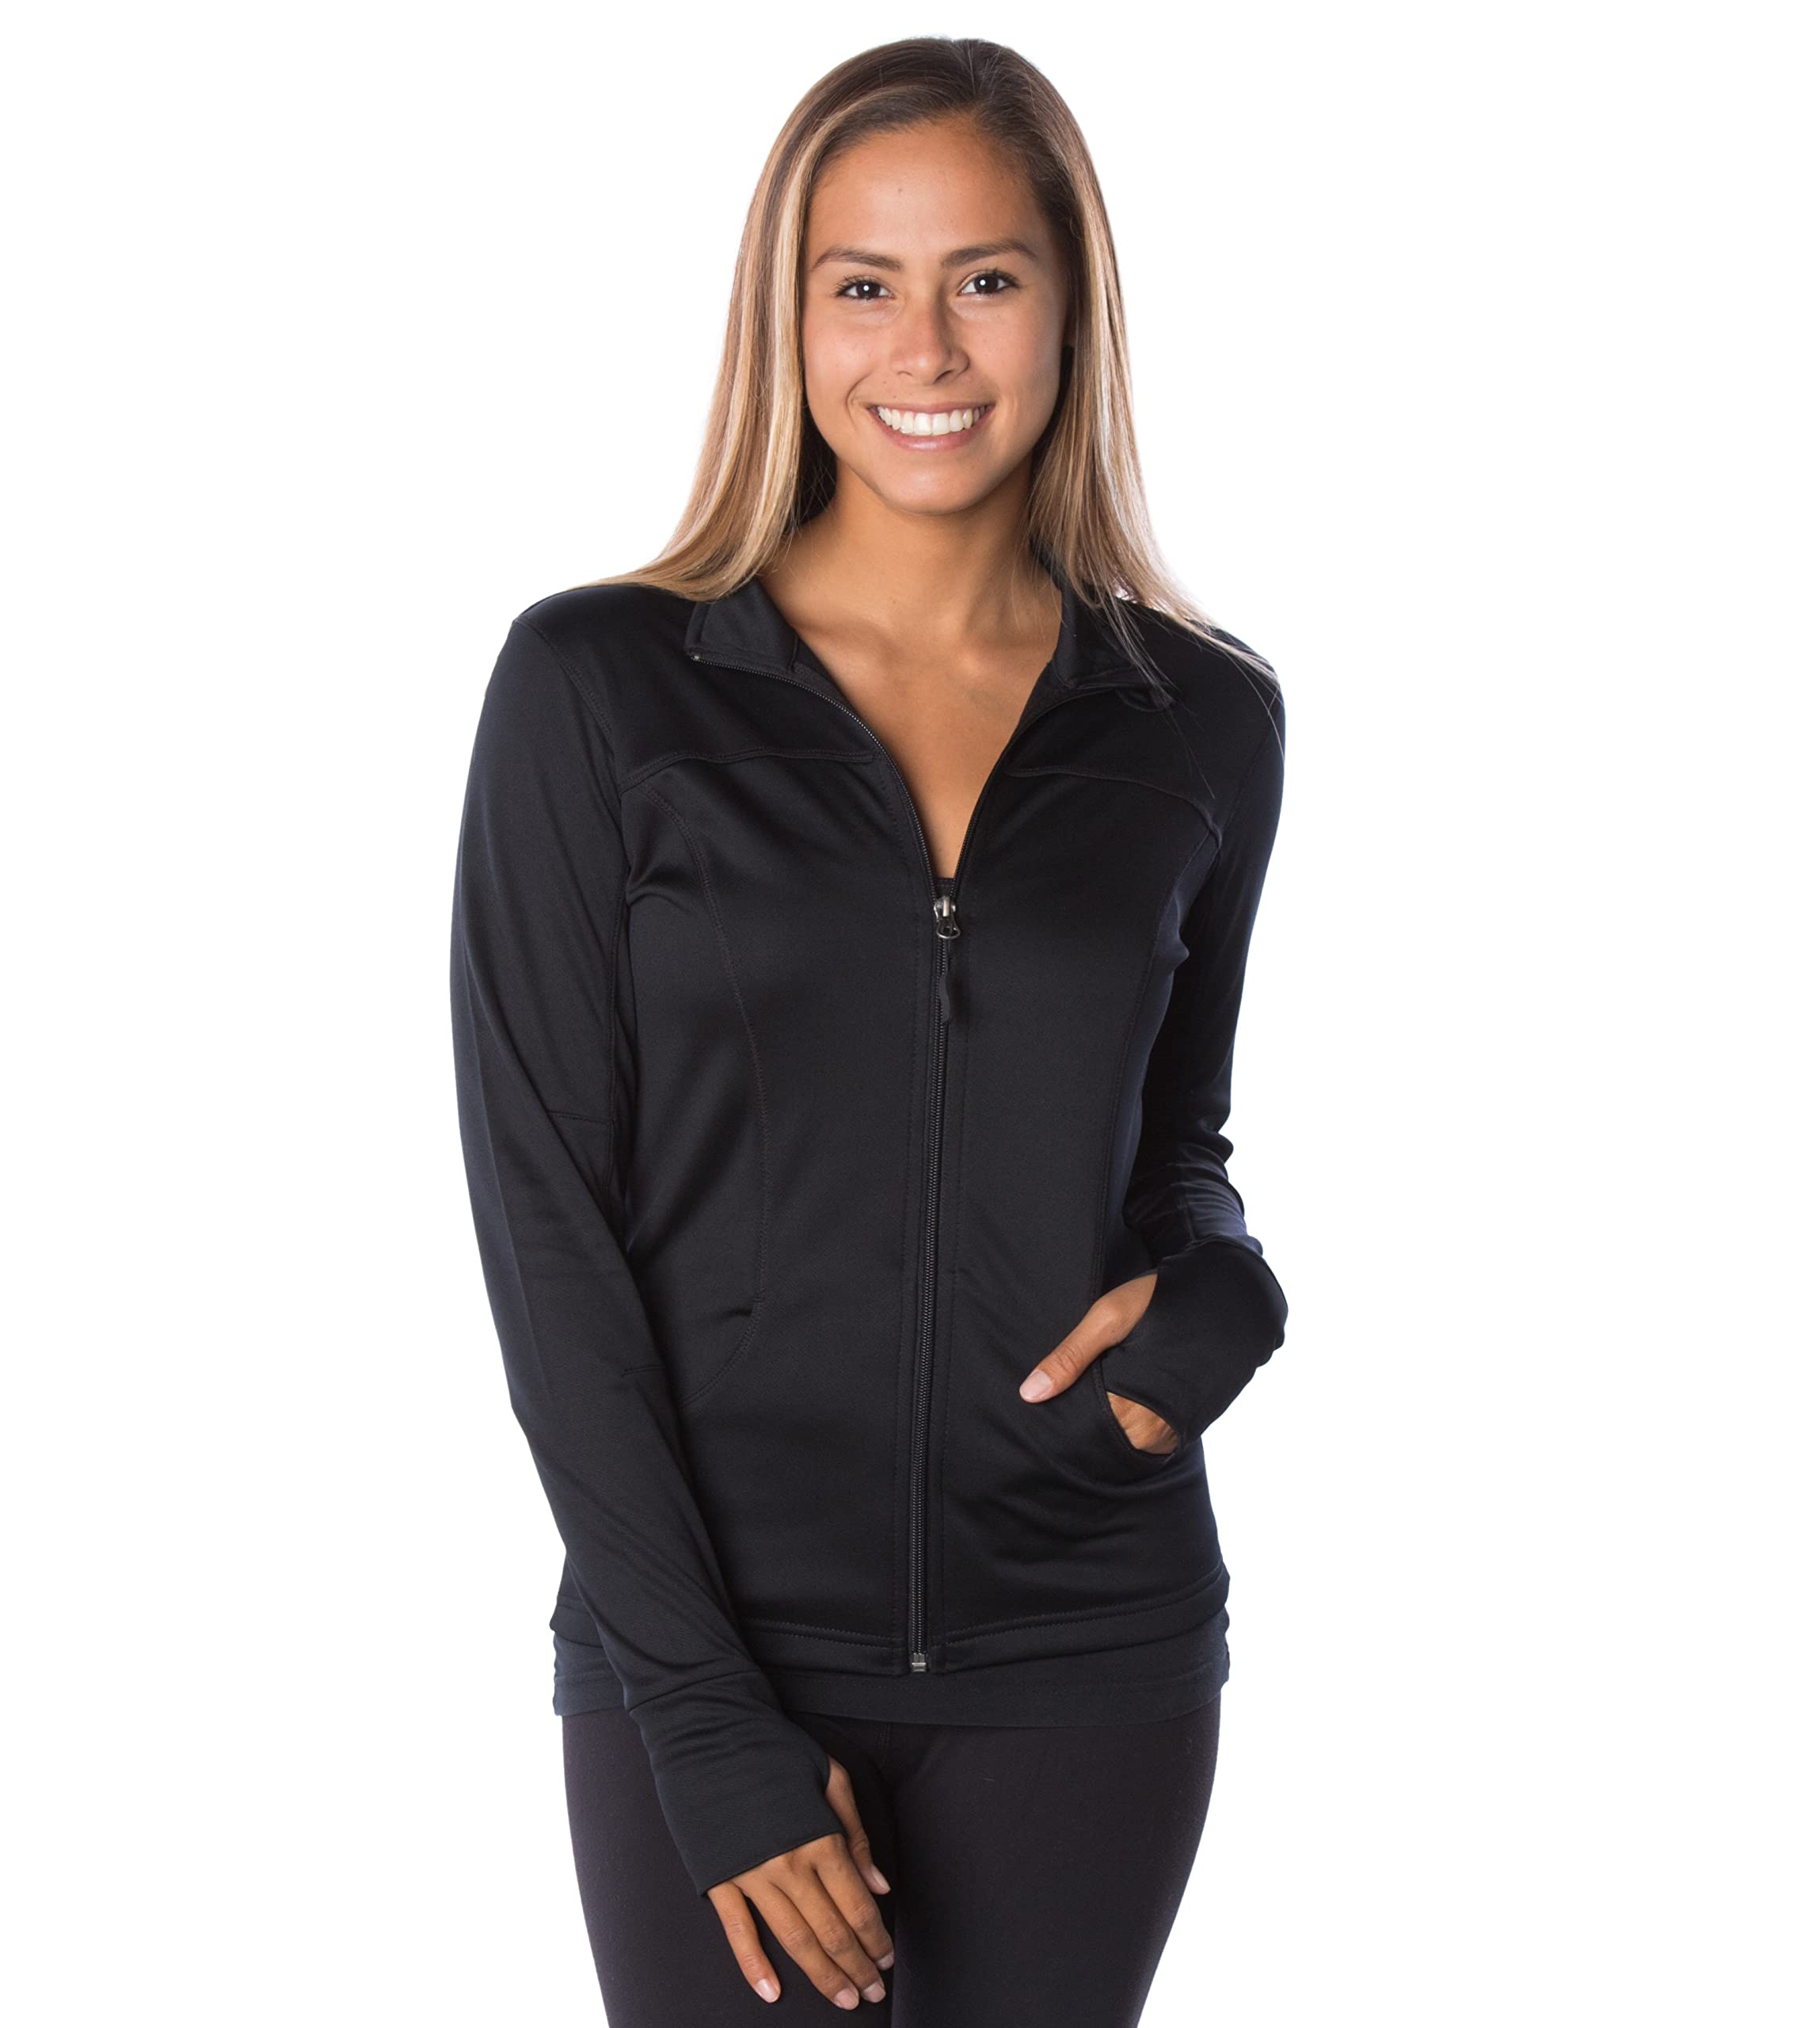 Global Blank Athletic Workout Jackets for Women, Full Zip-Up